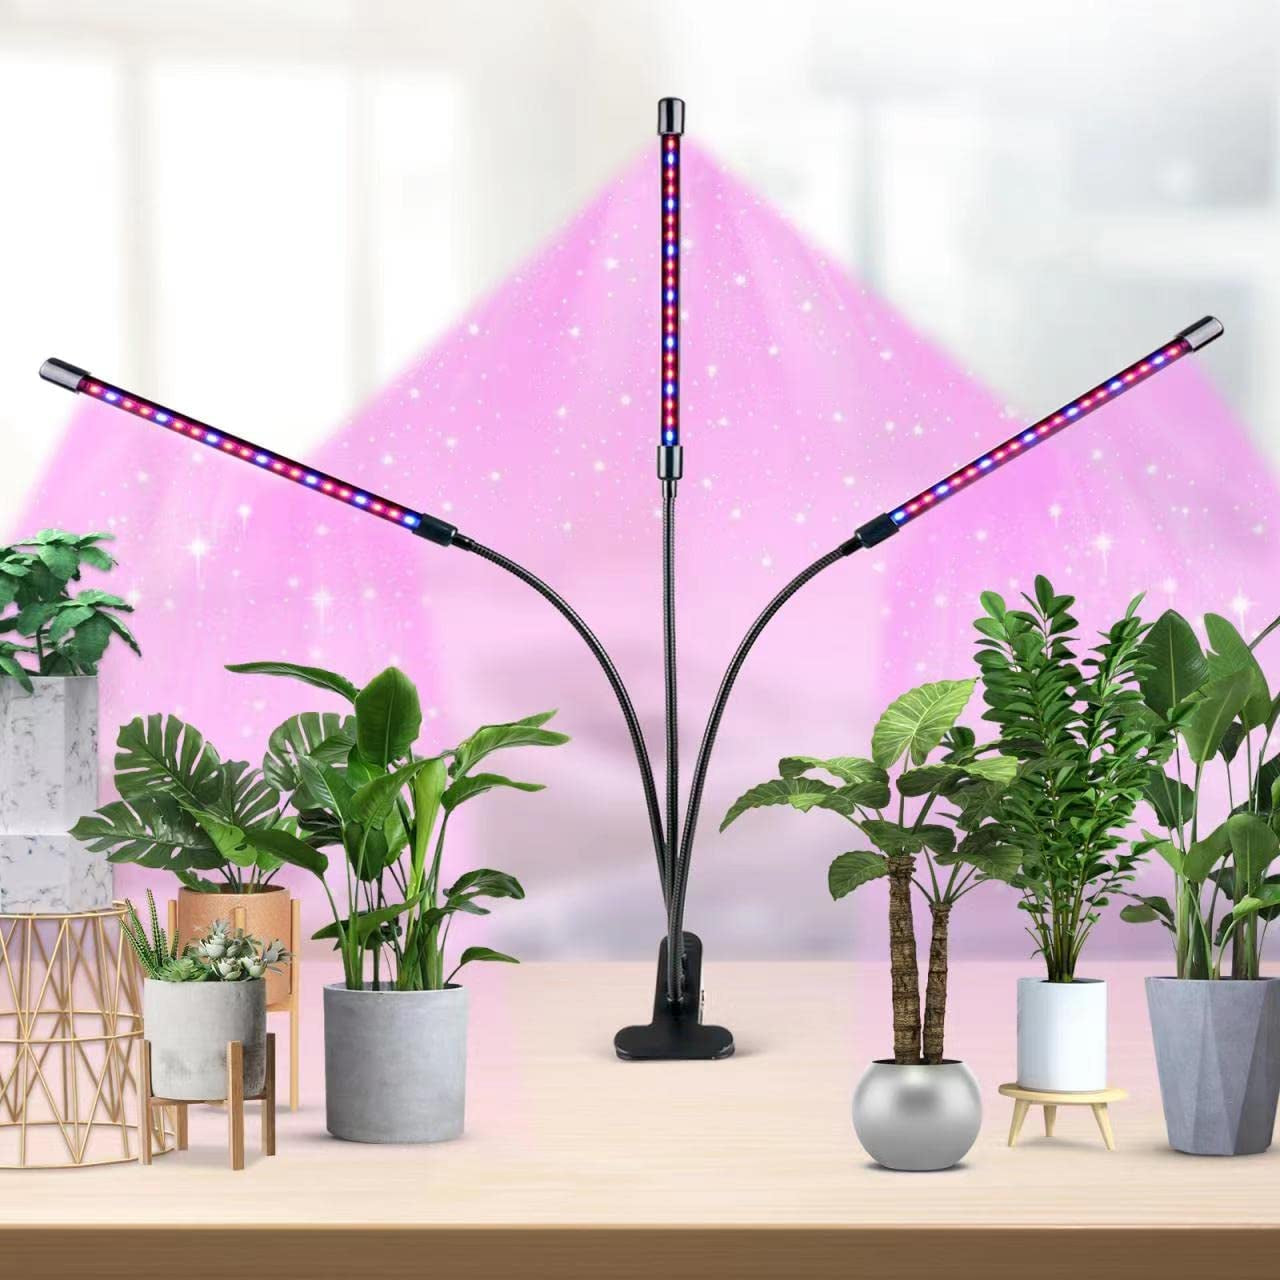 Led Grow Light for Indoor Plants,3 Heads Full Spectrum Plant Light, 10 Dimmable Brightness, 3/9/12H Timer, Growing Lamp for Indoor Plants Growth